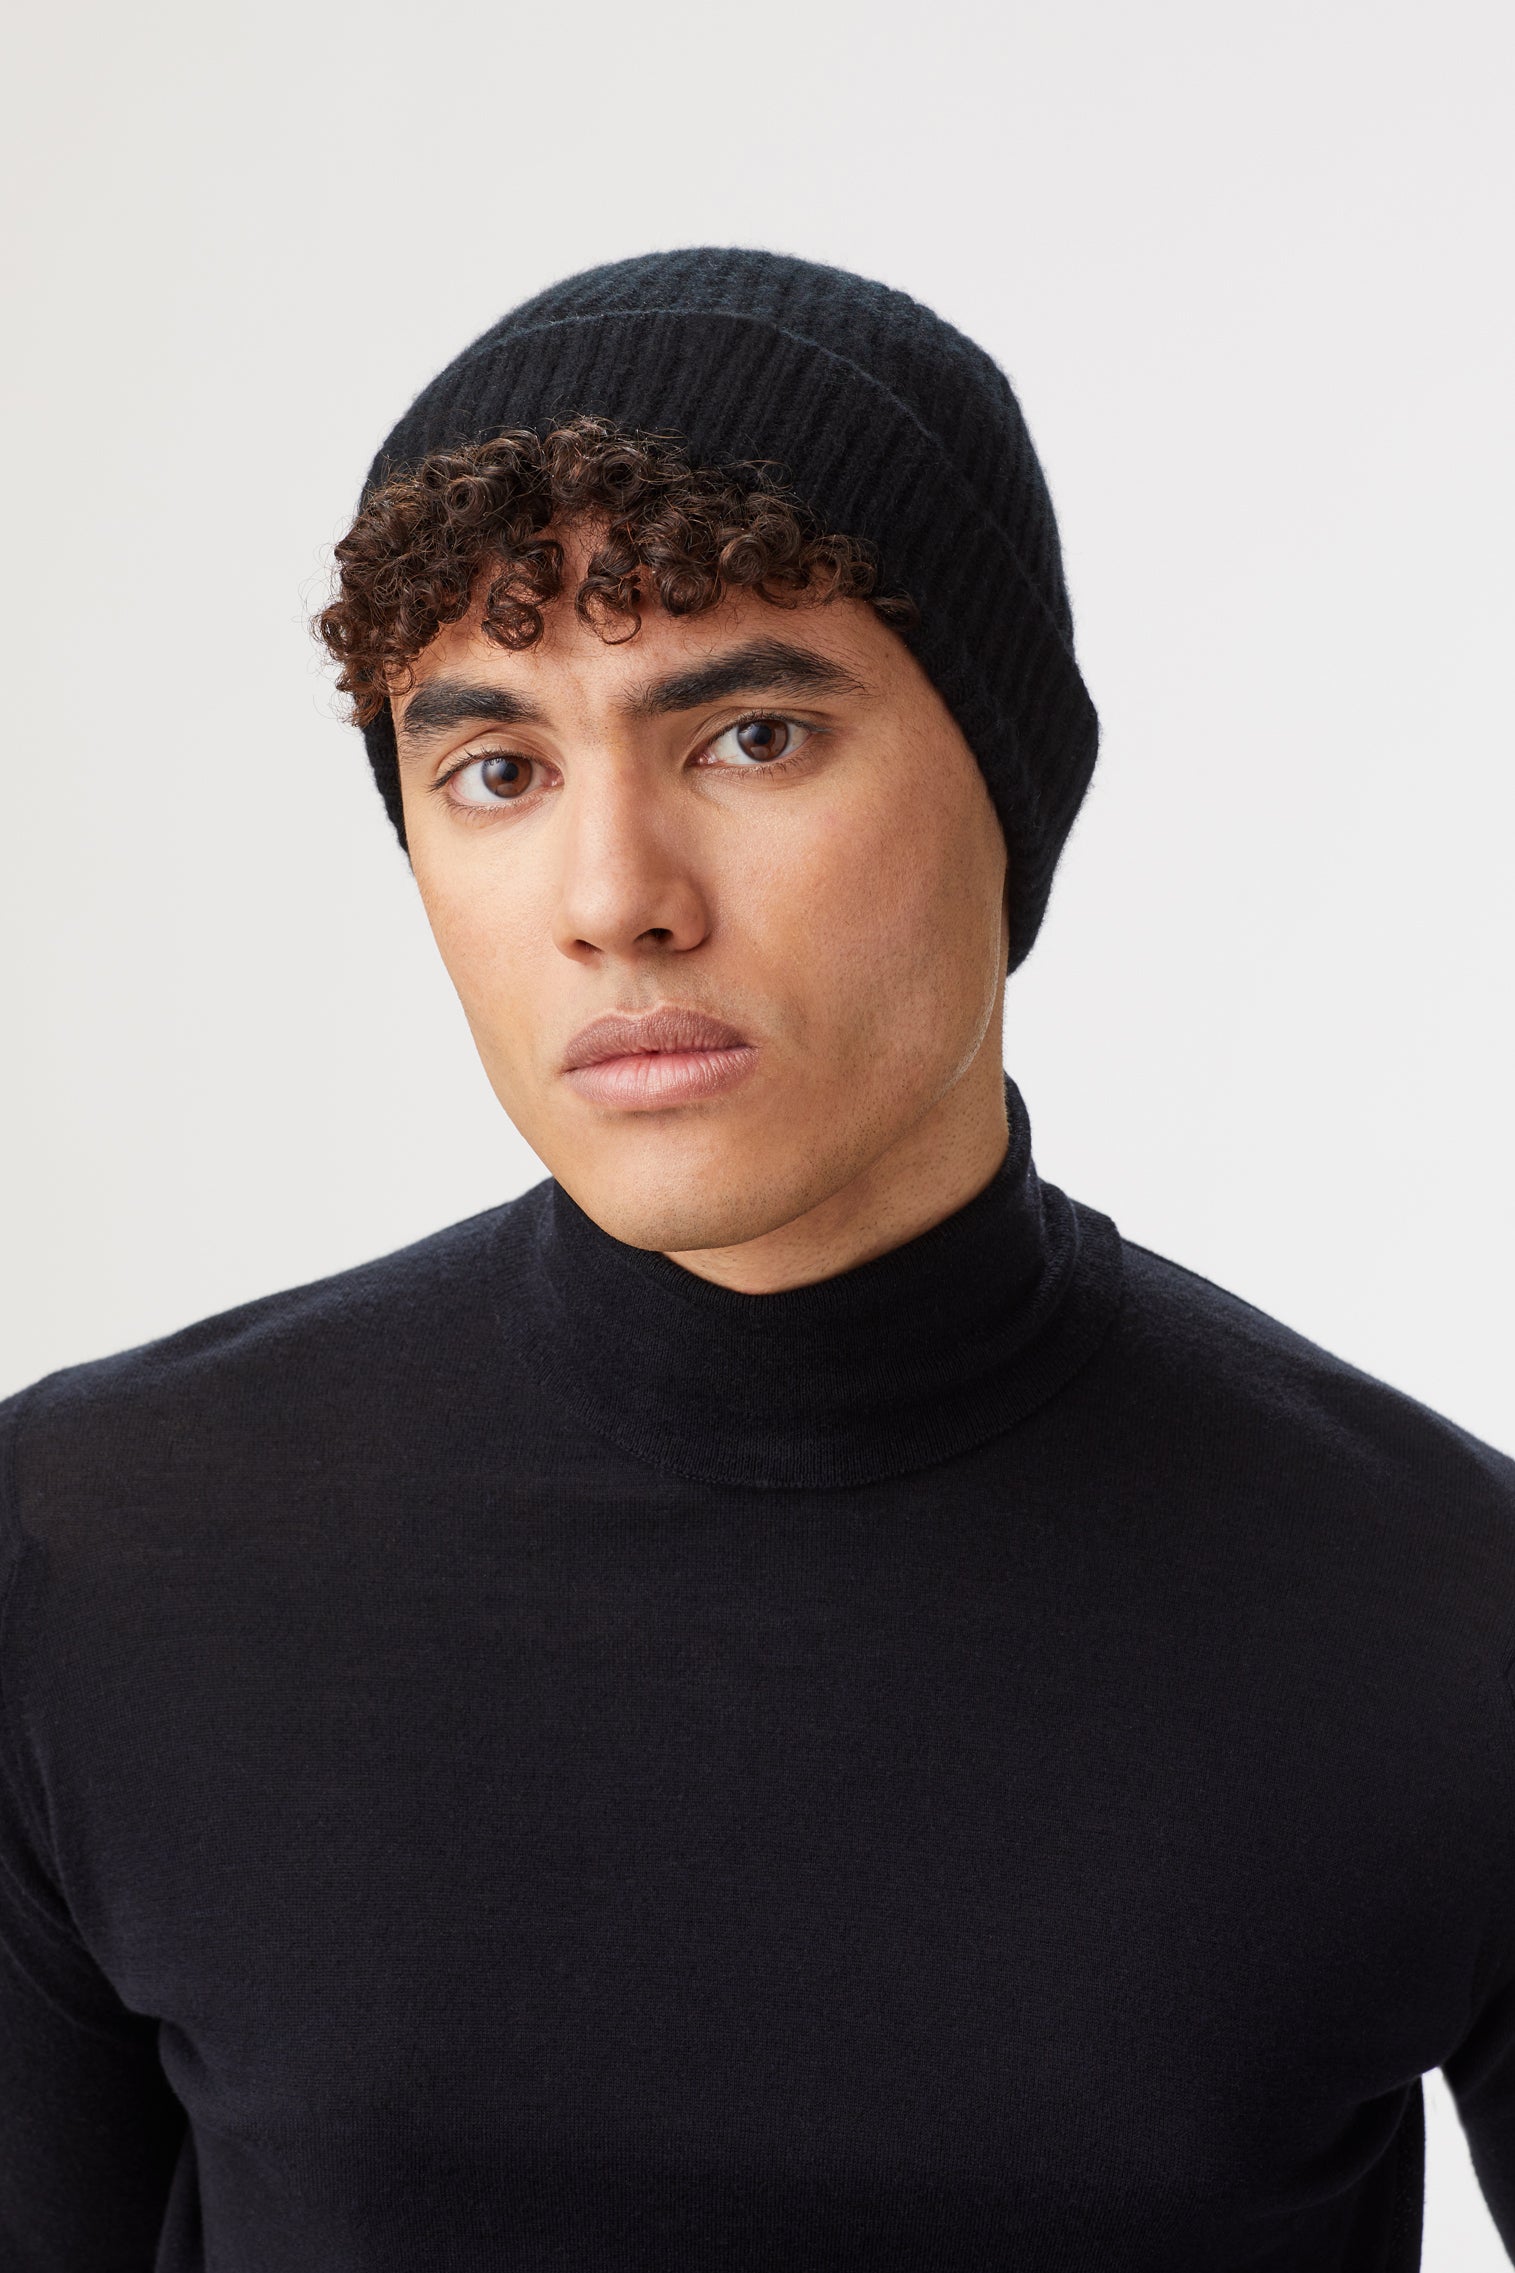 Black Cashmere Ski Beanie - Hats for Tall People - Lock & Co. Hatters London UK